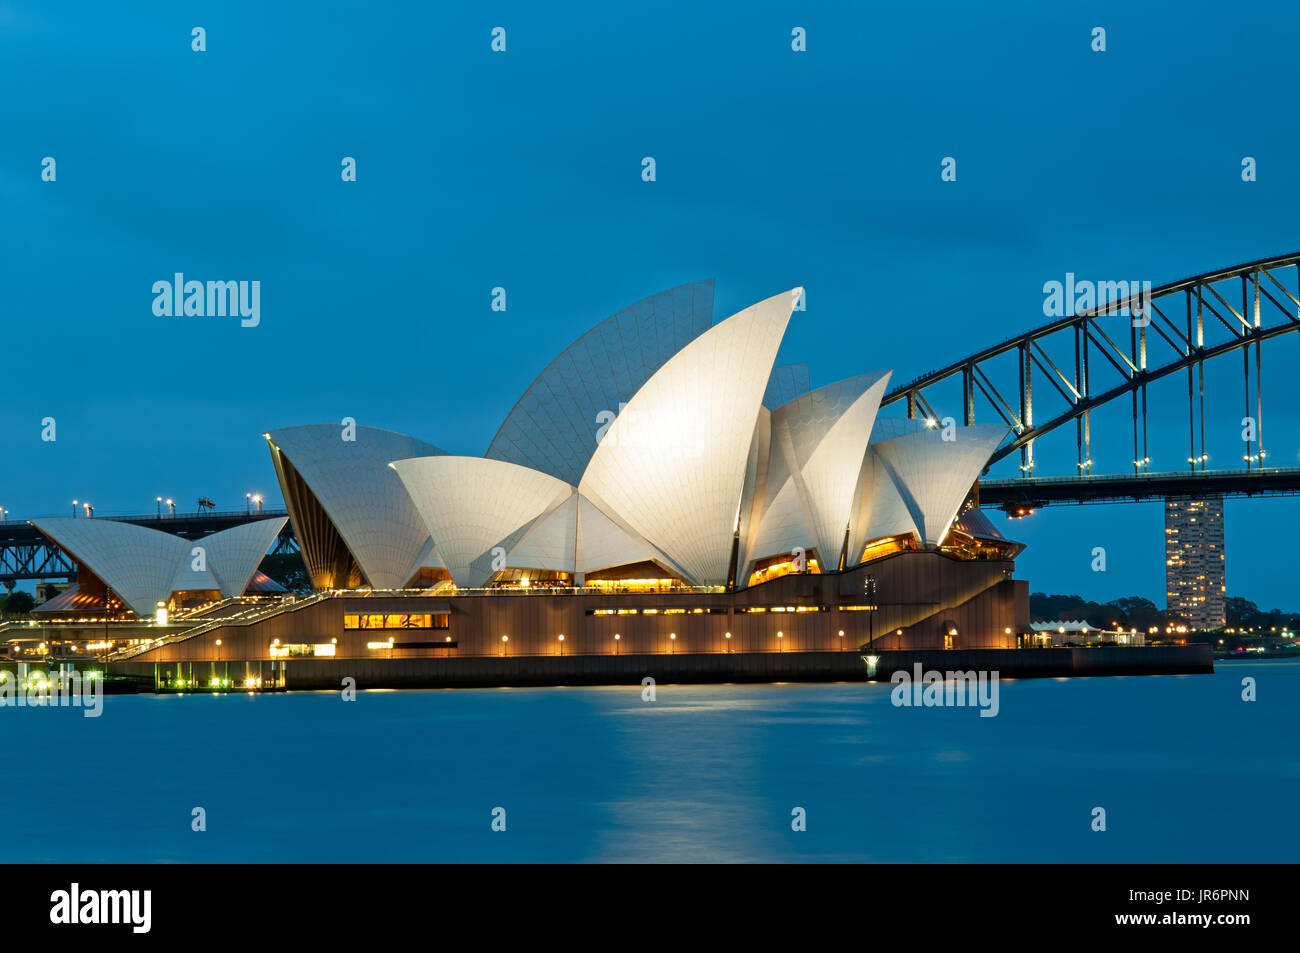 Sydney, Australia - October 18, 2015: Night view of Sydney Opera House see from Mrs Macquarie's Chair in Sydney, one of the iconic landmark in New Sou Stock Photo